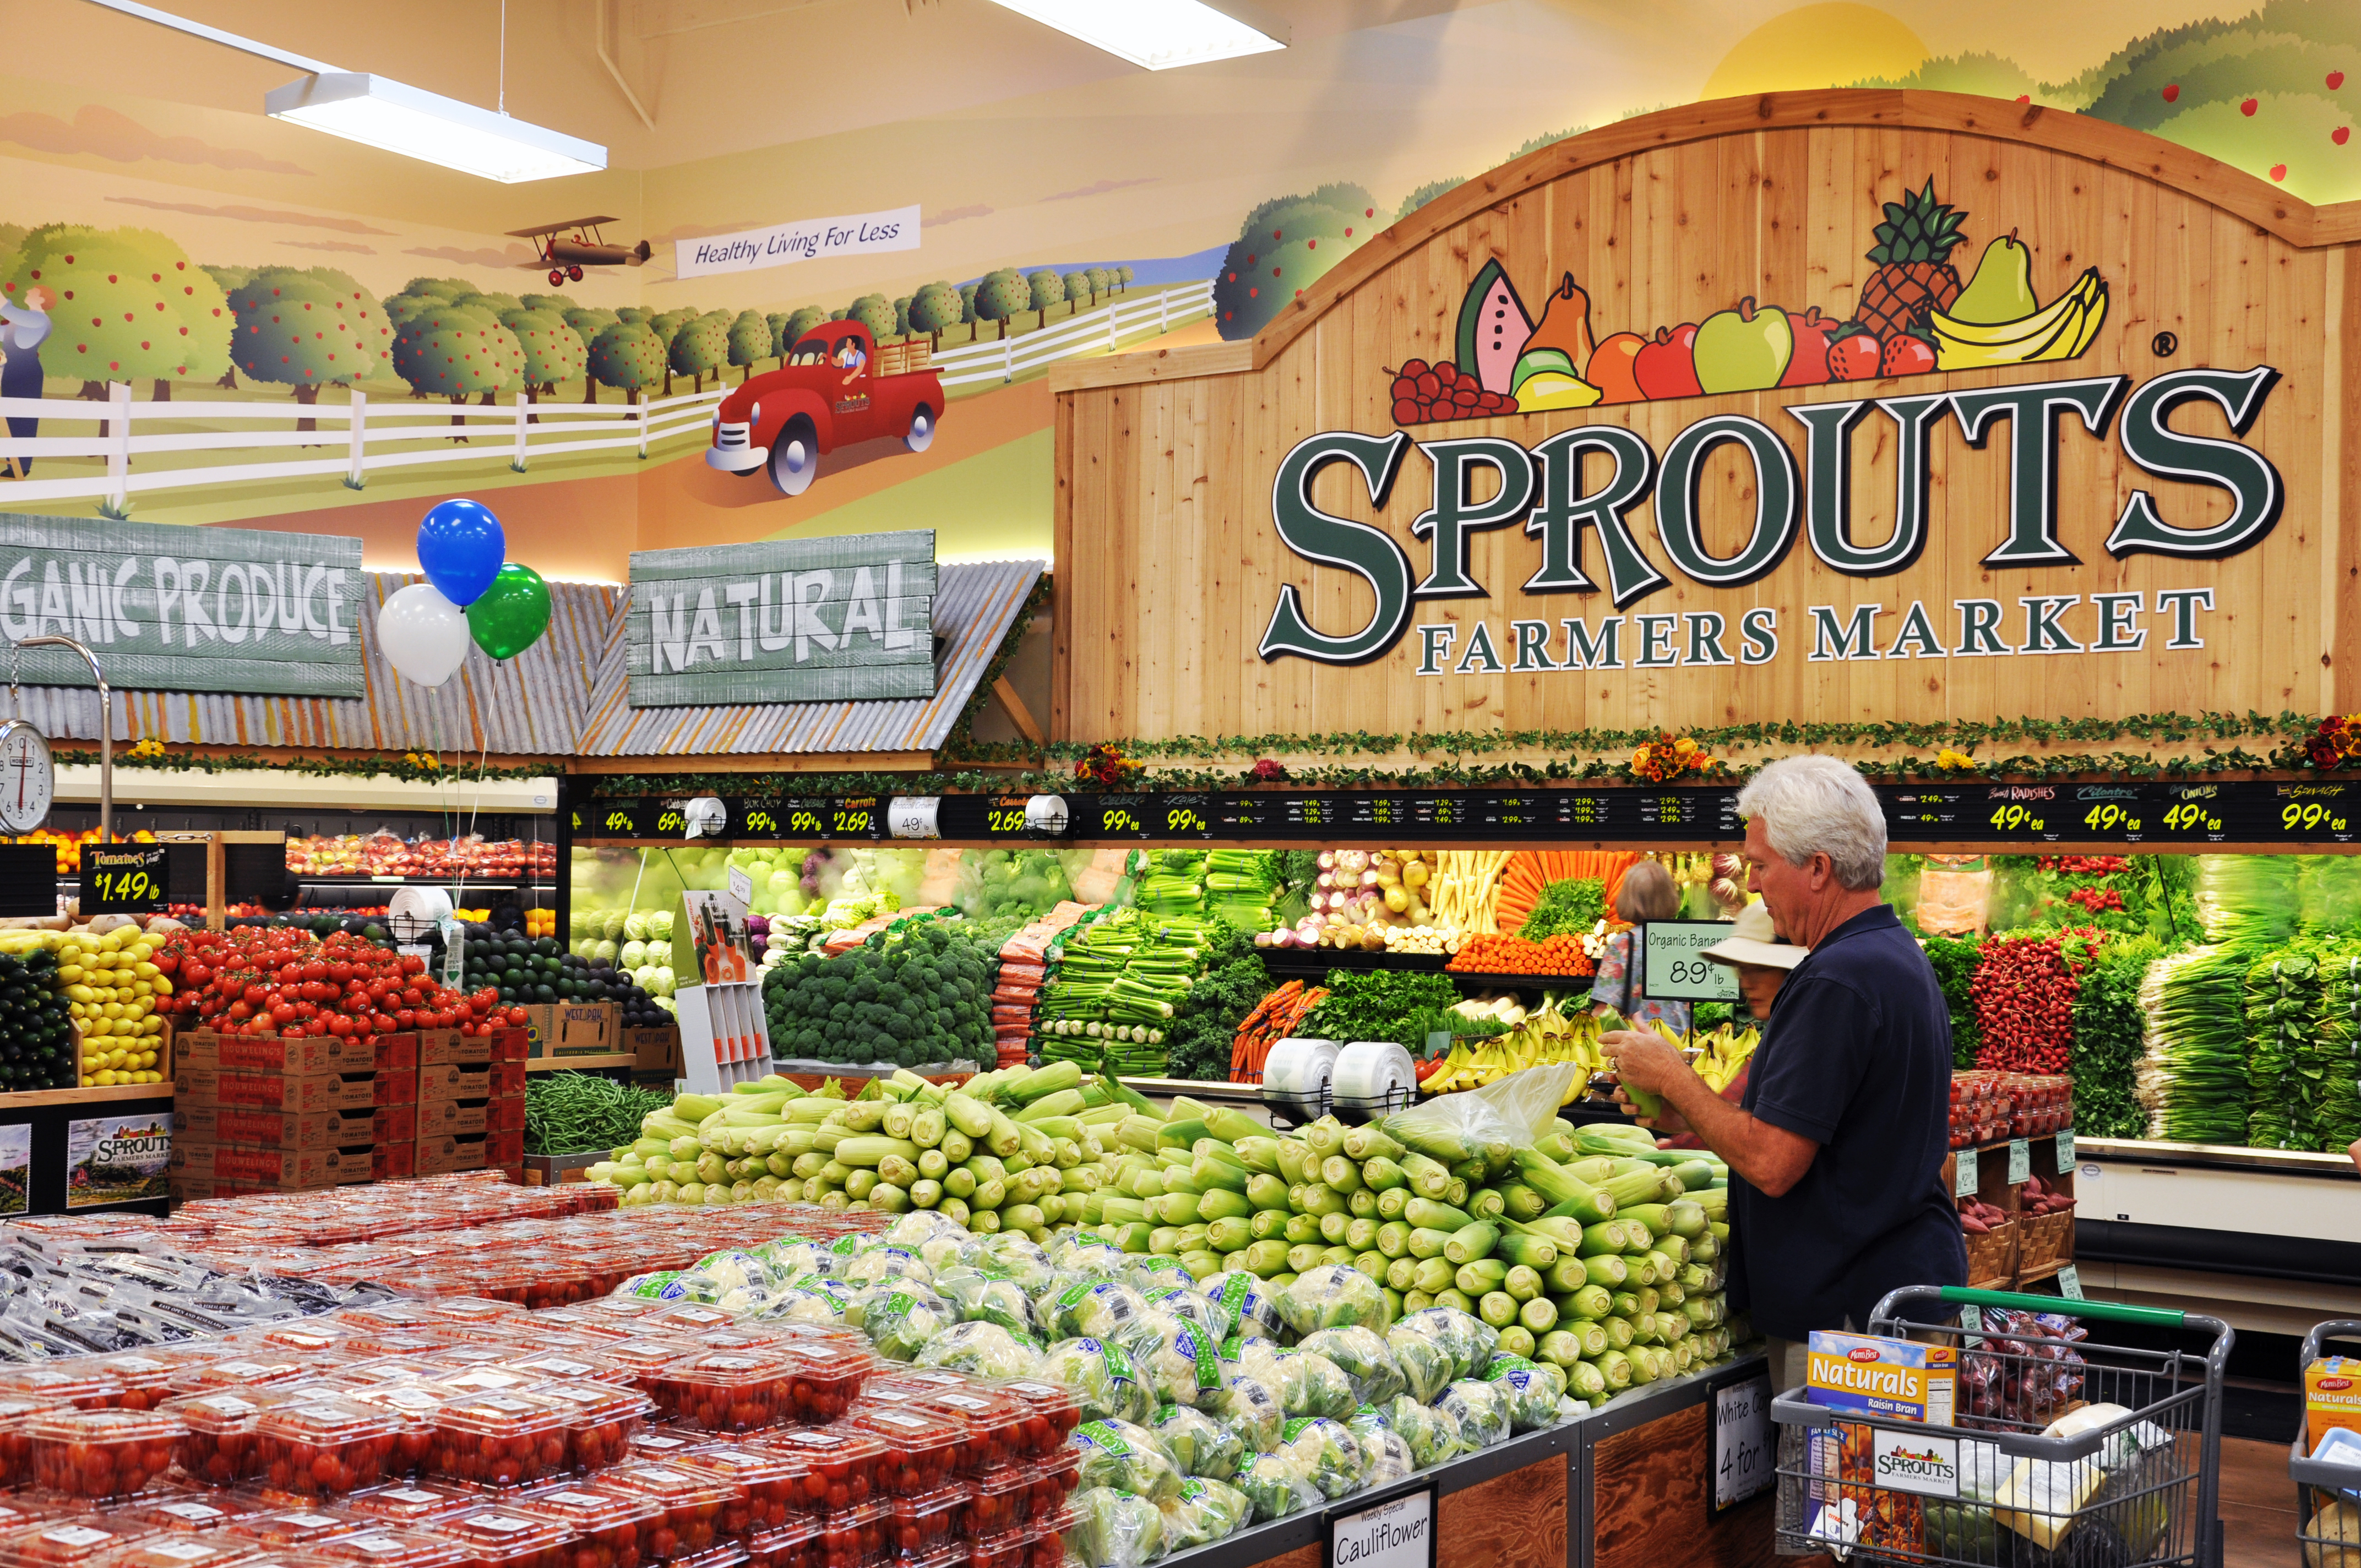 Shopping Sprouts Farmers Market Means Delicious Deals & Meals Plus Win